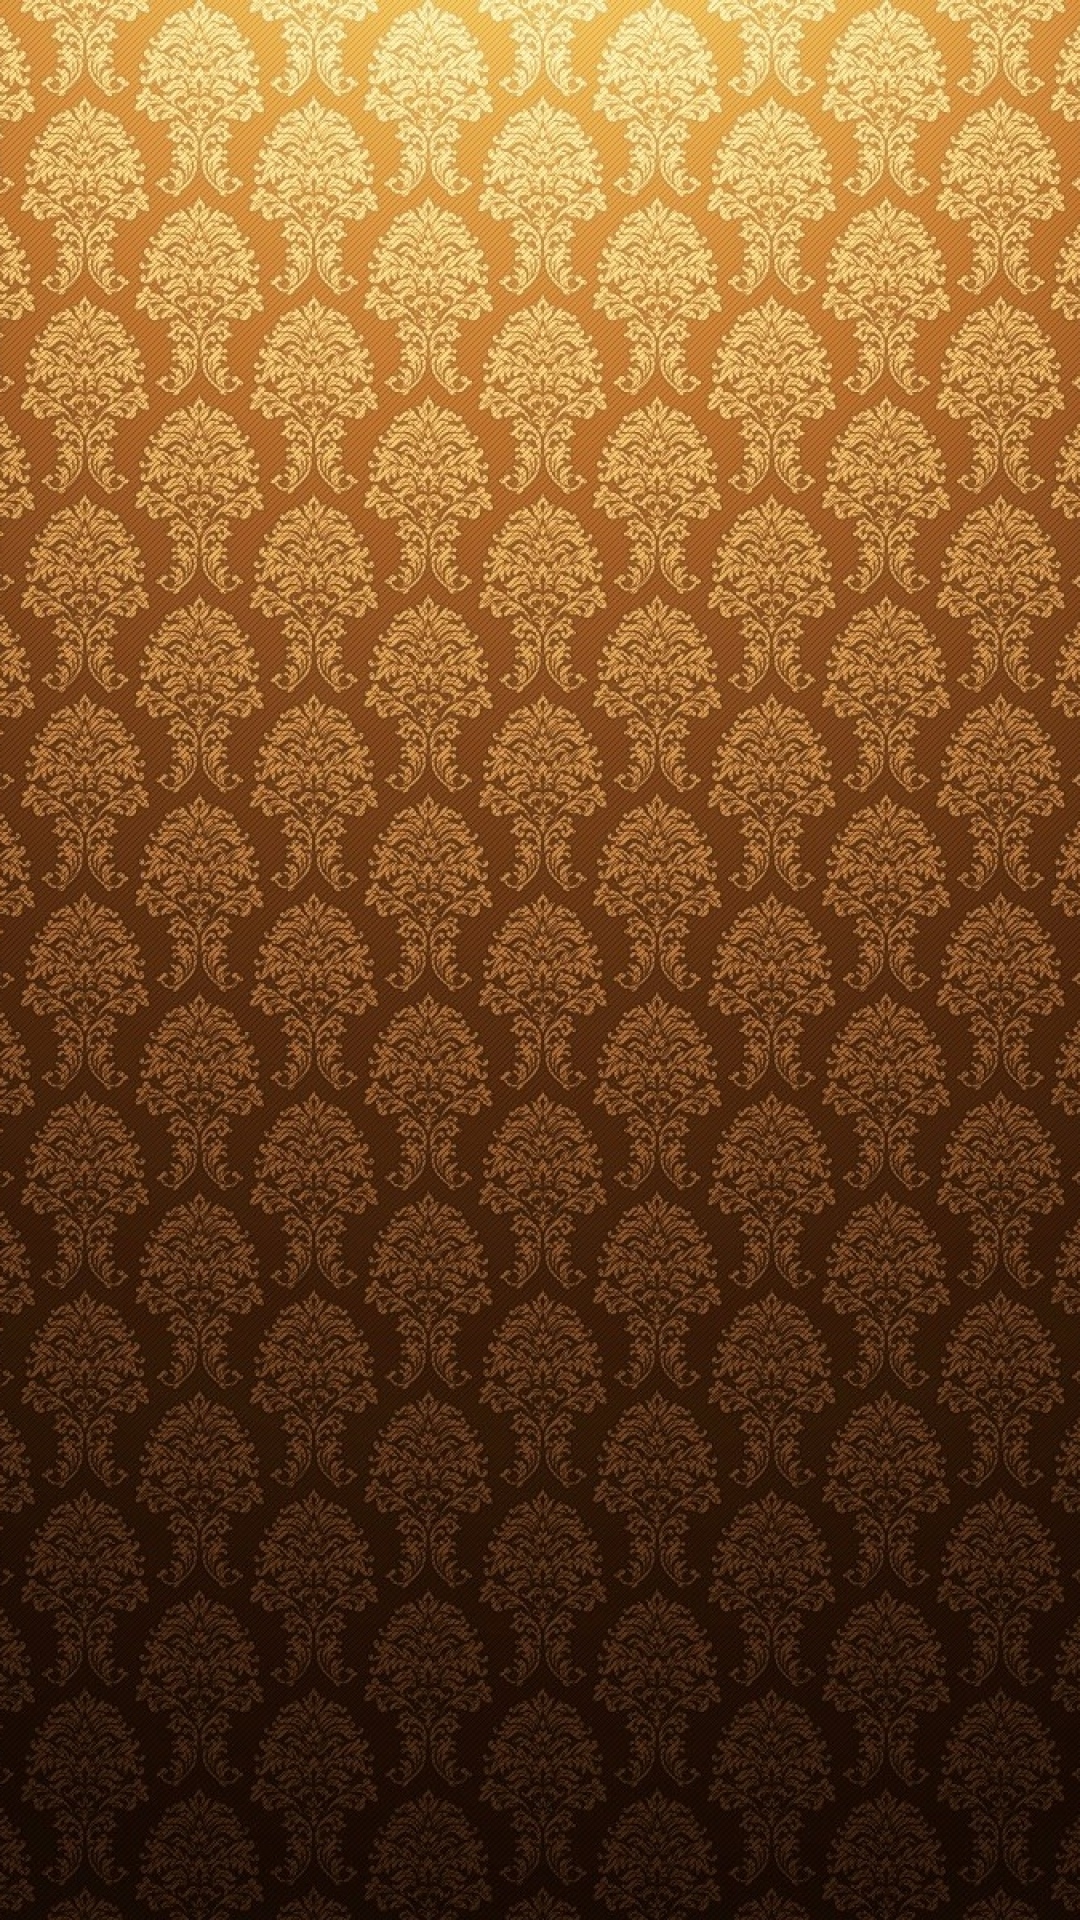 Gold Wallpapers, Free Hd Gold Wallpapers, 28216